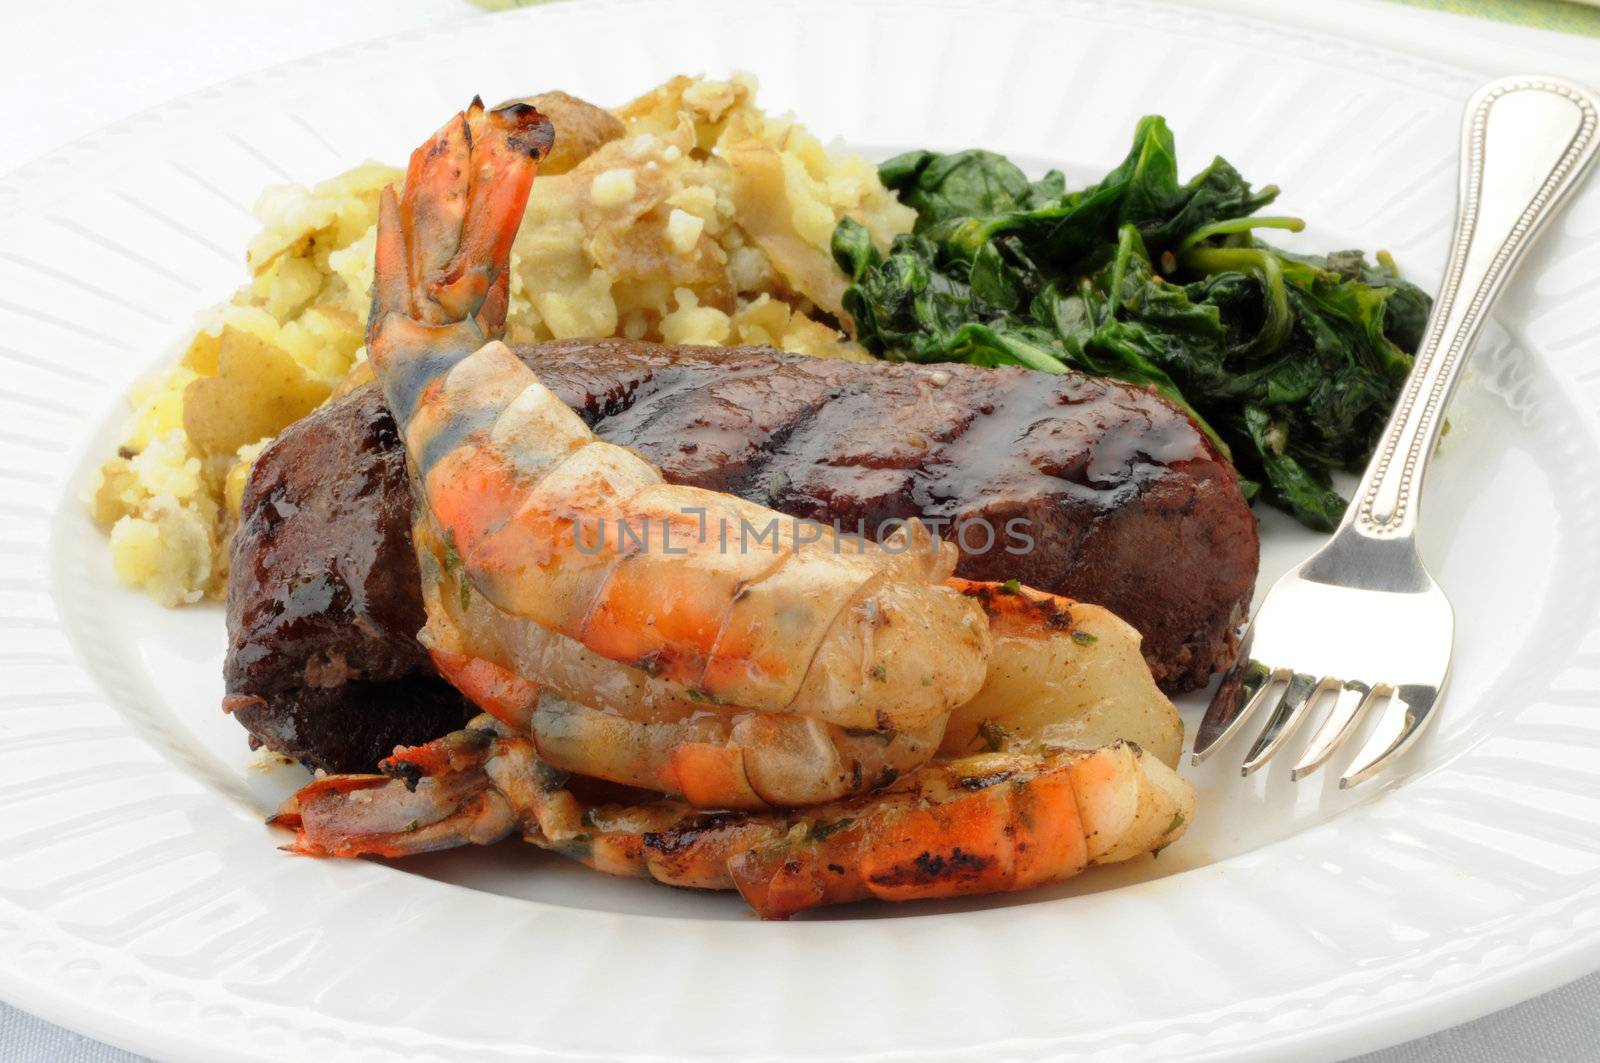 Grilled Shrimp and Steak by billberryphotography